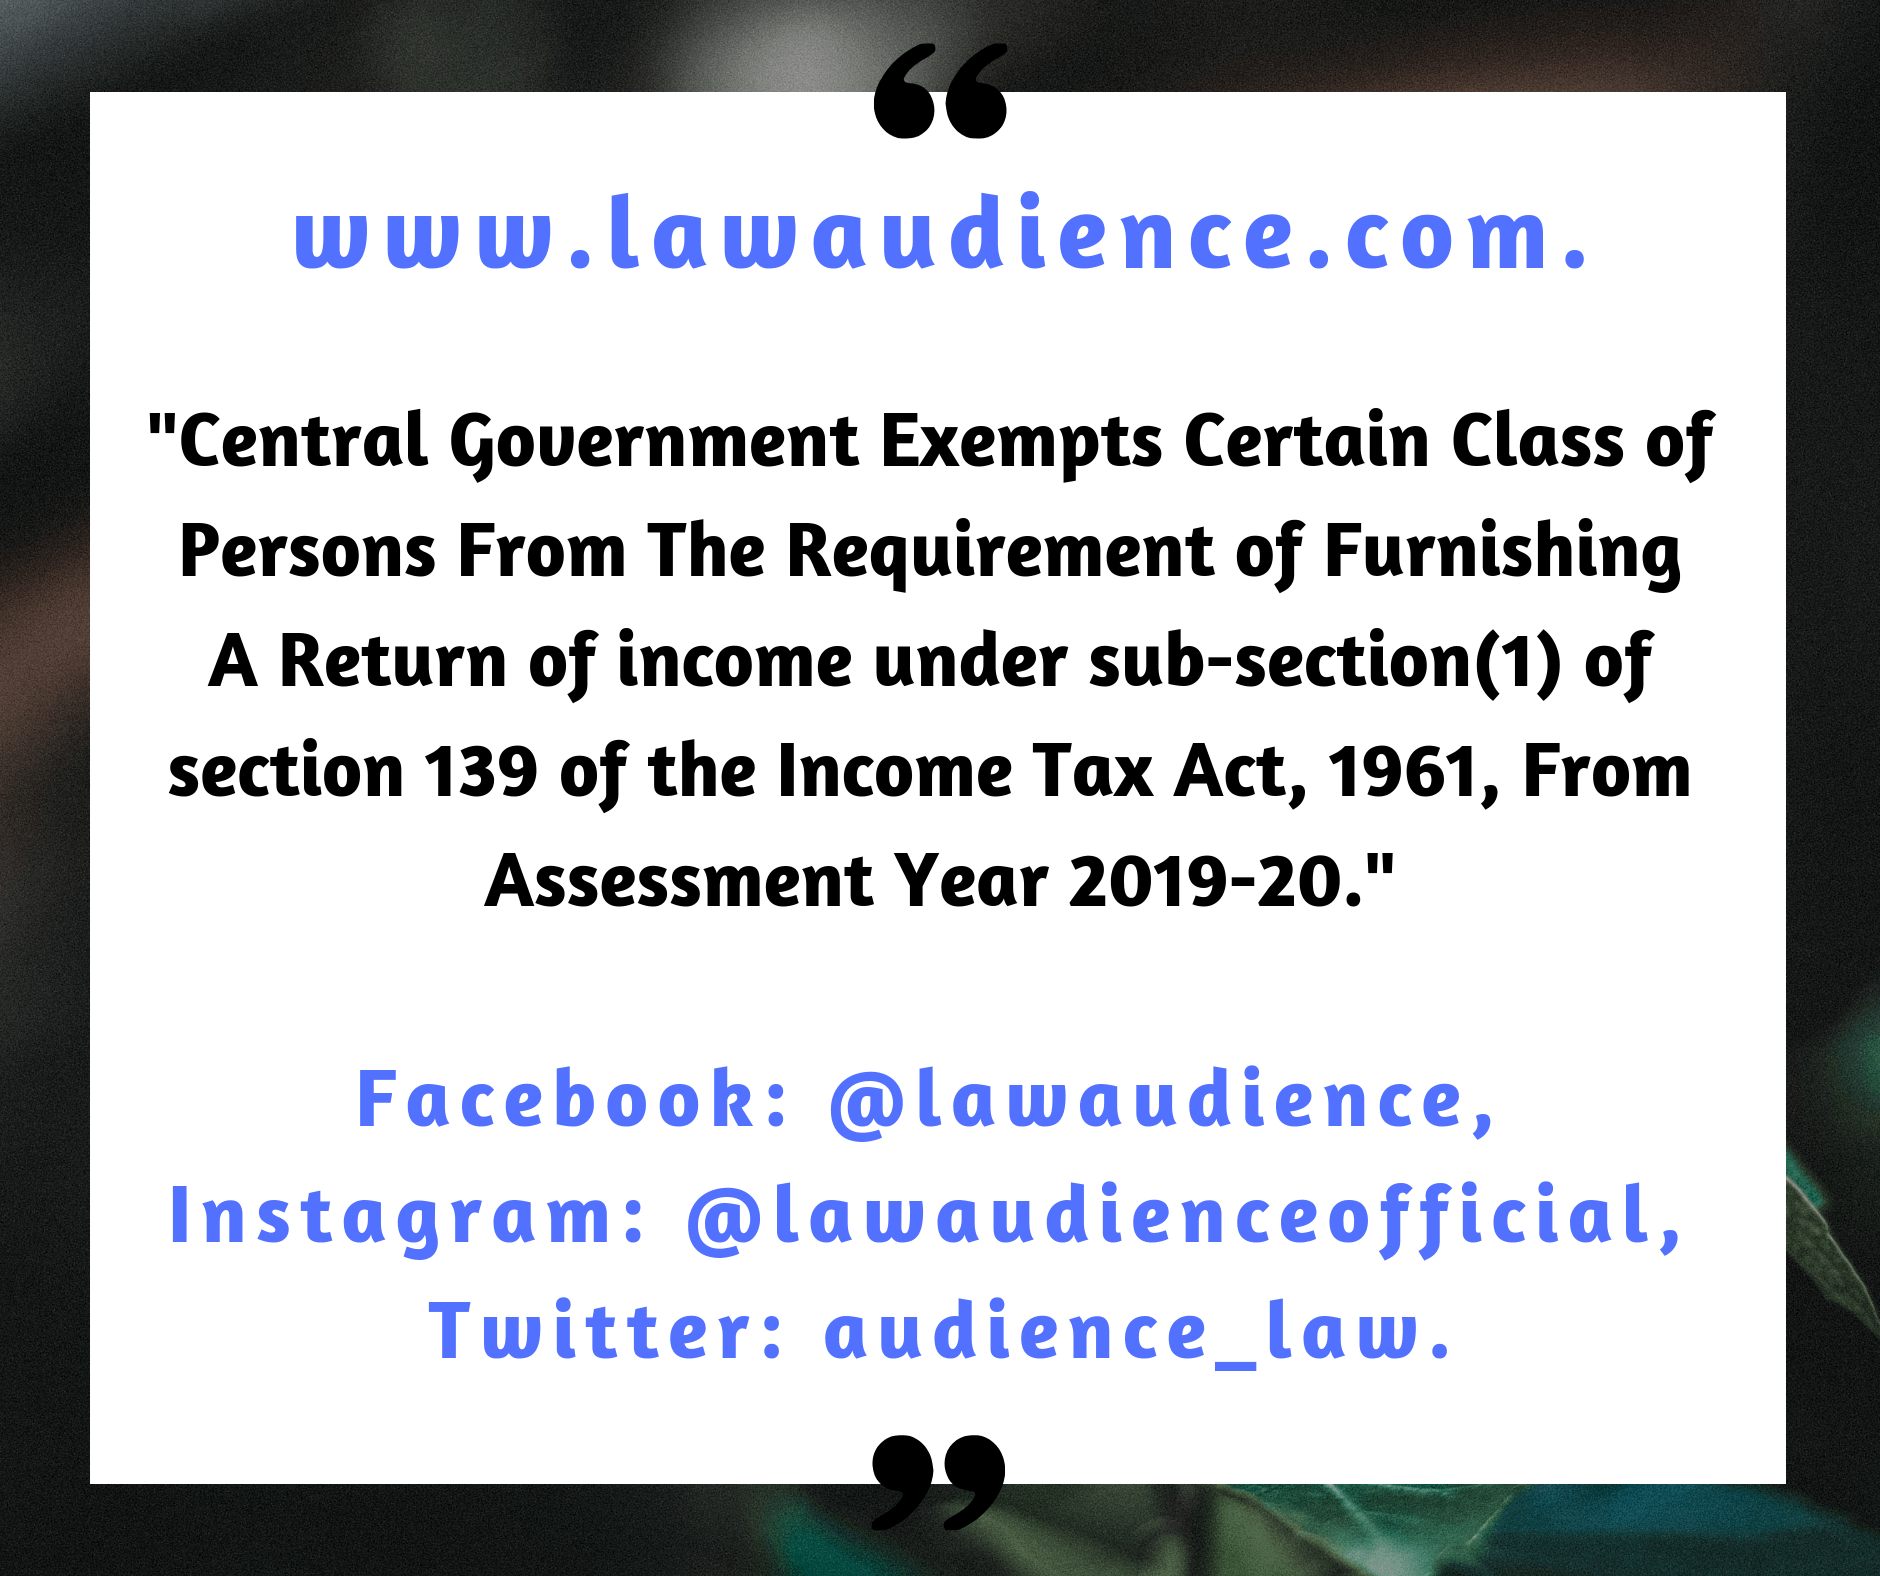 You are currently viewing Central Government Exempts Certain Class of Persons From The Requirement of Furnishing A Return of Income Under Sub-Section (1) of Section 139 of The Income Tax Act, 1961, From Assessment Year 2019-20.